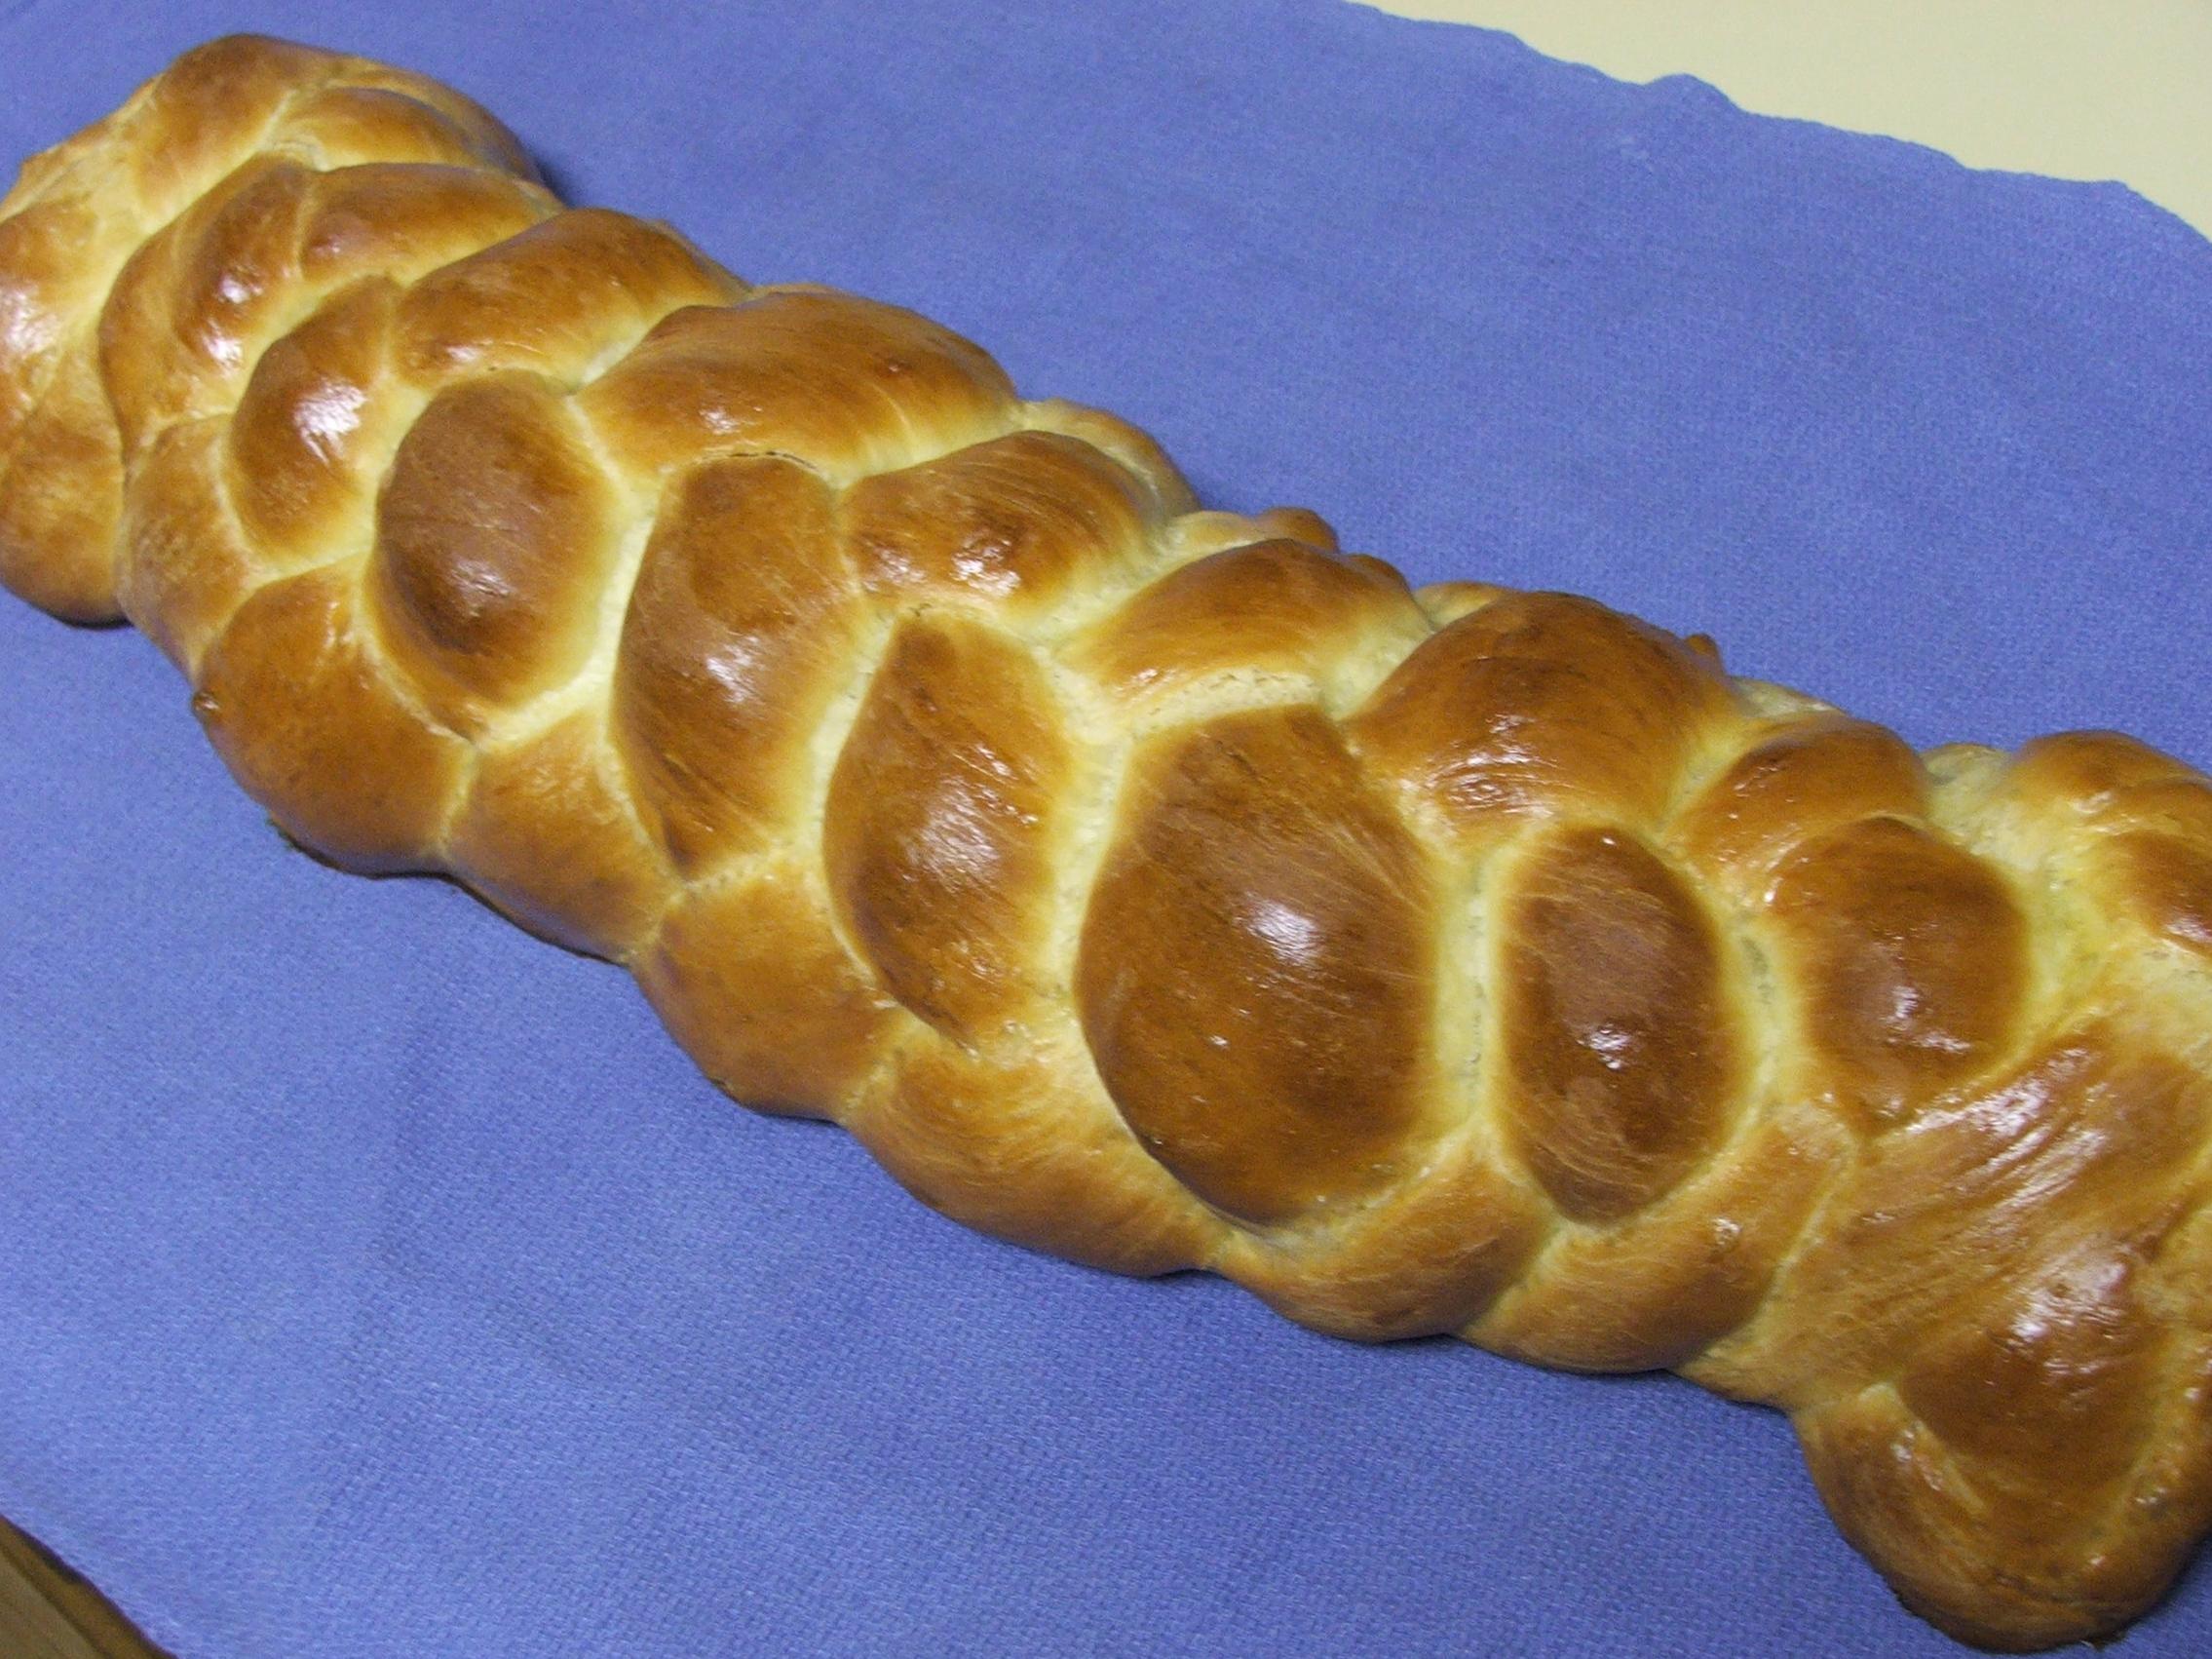  A Heavenly Challah for High-Altitudes